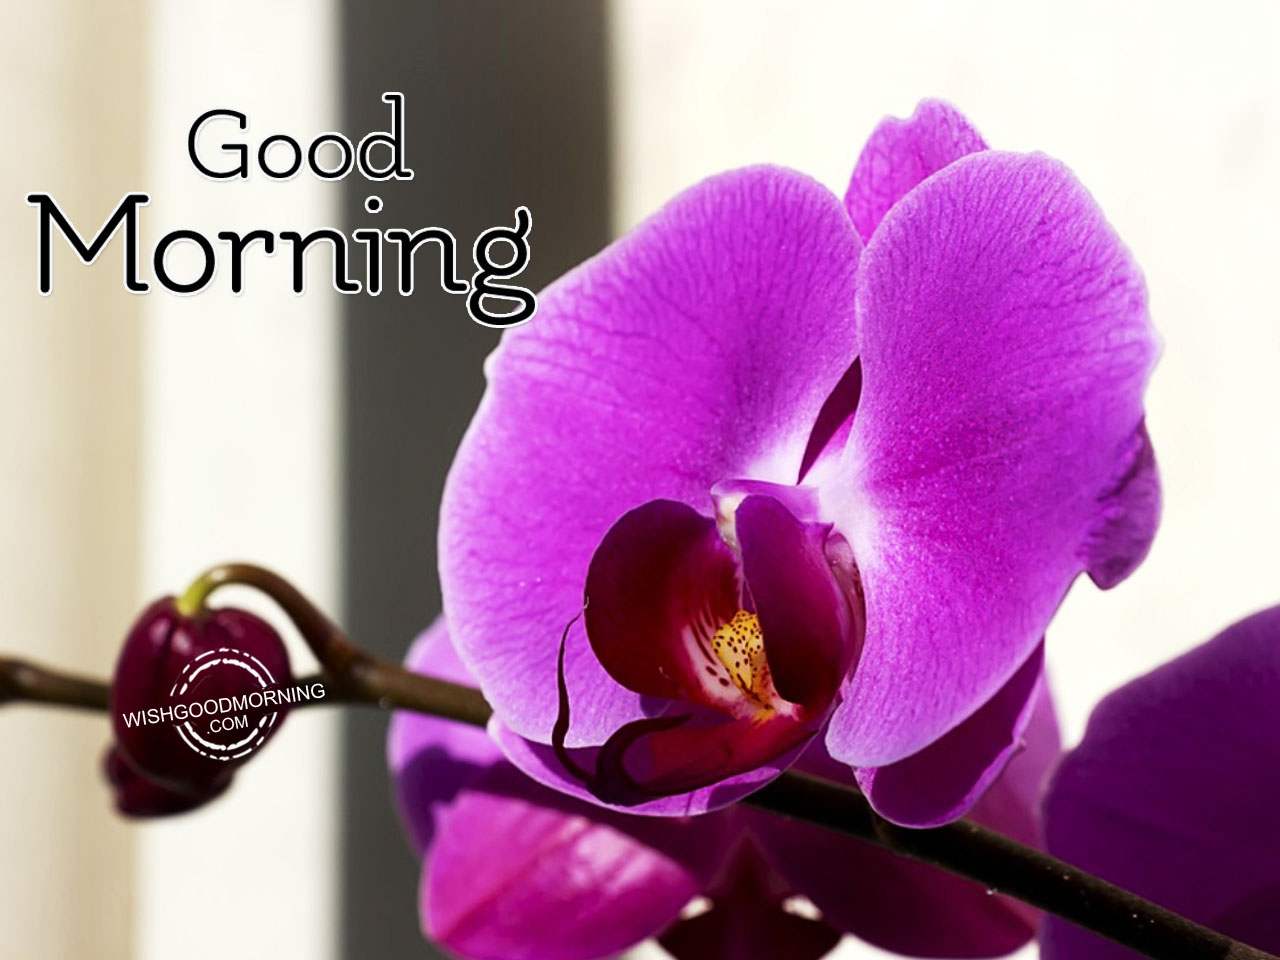 Very Good Morning - Good Morning Pictures – WishGoodMorning.com